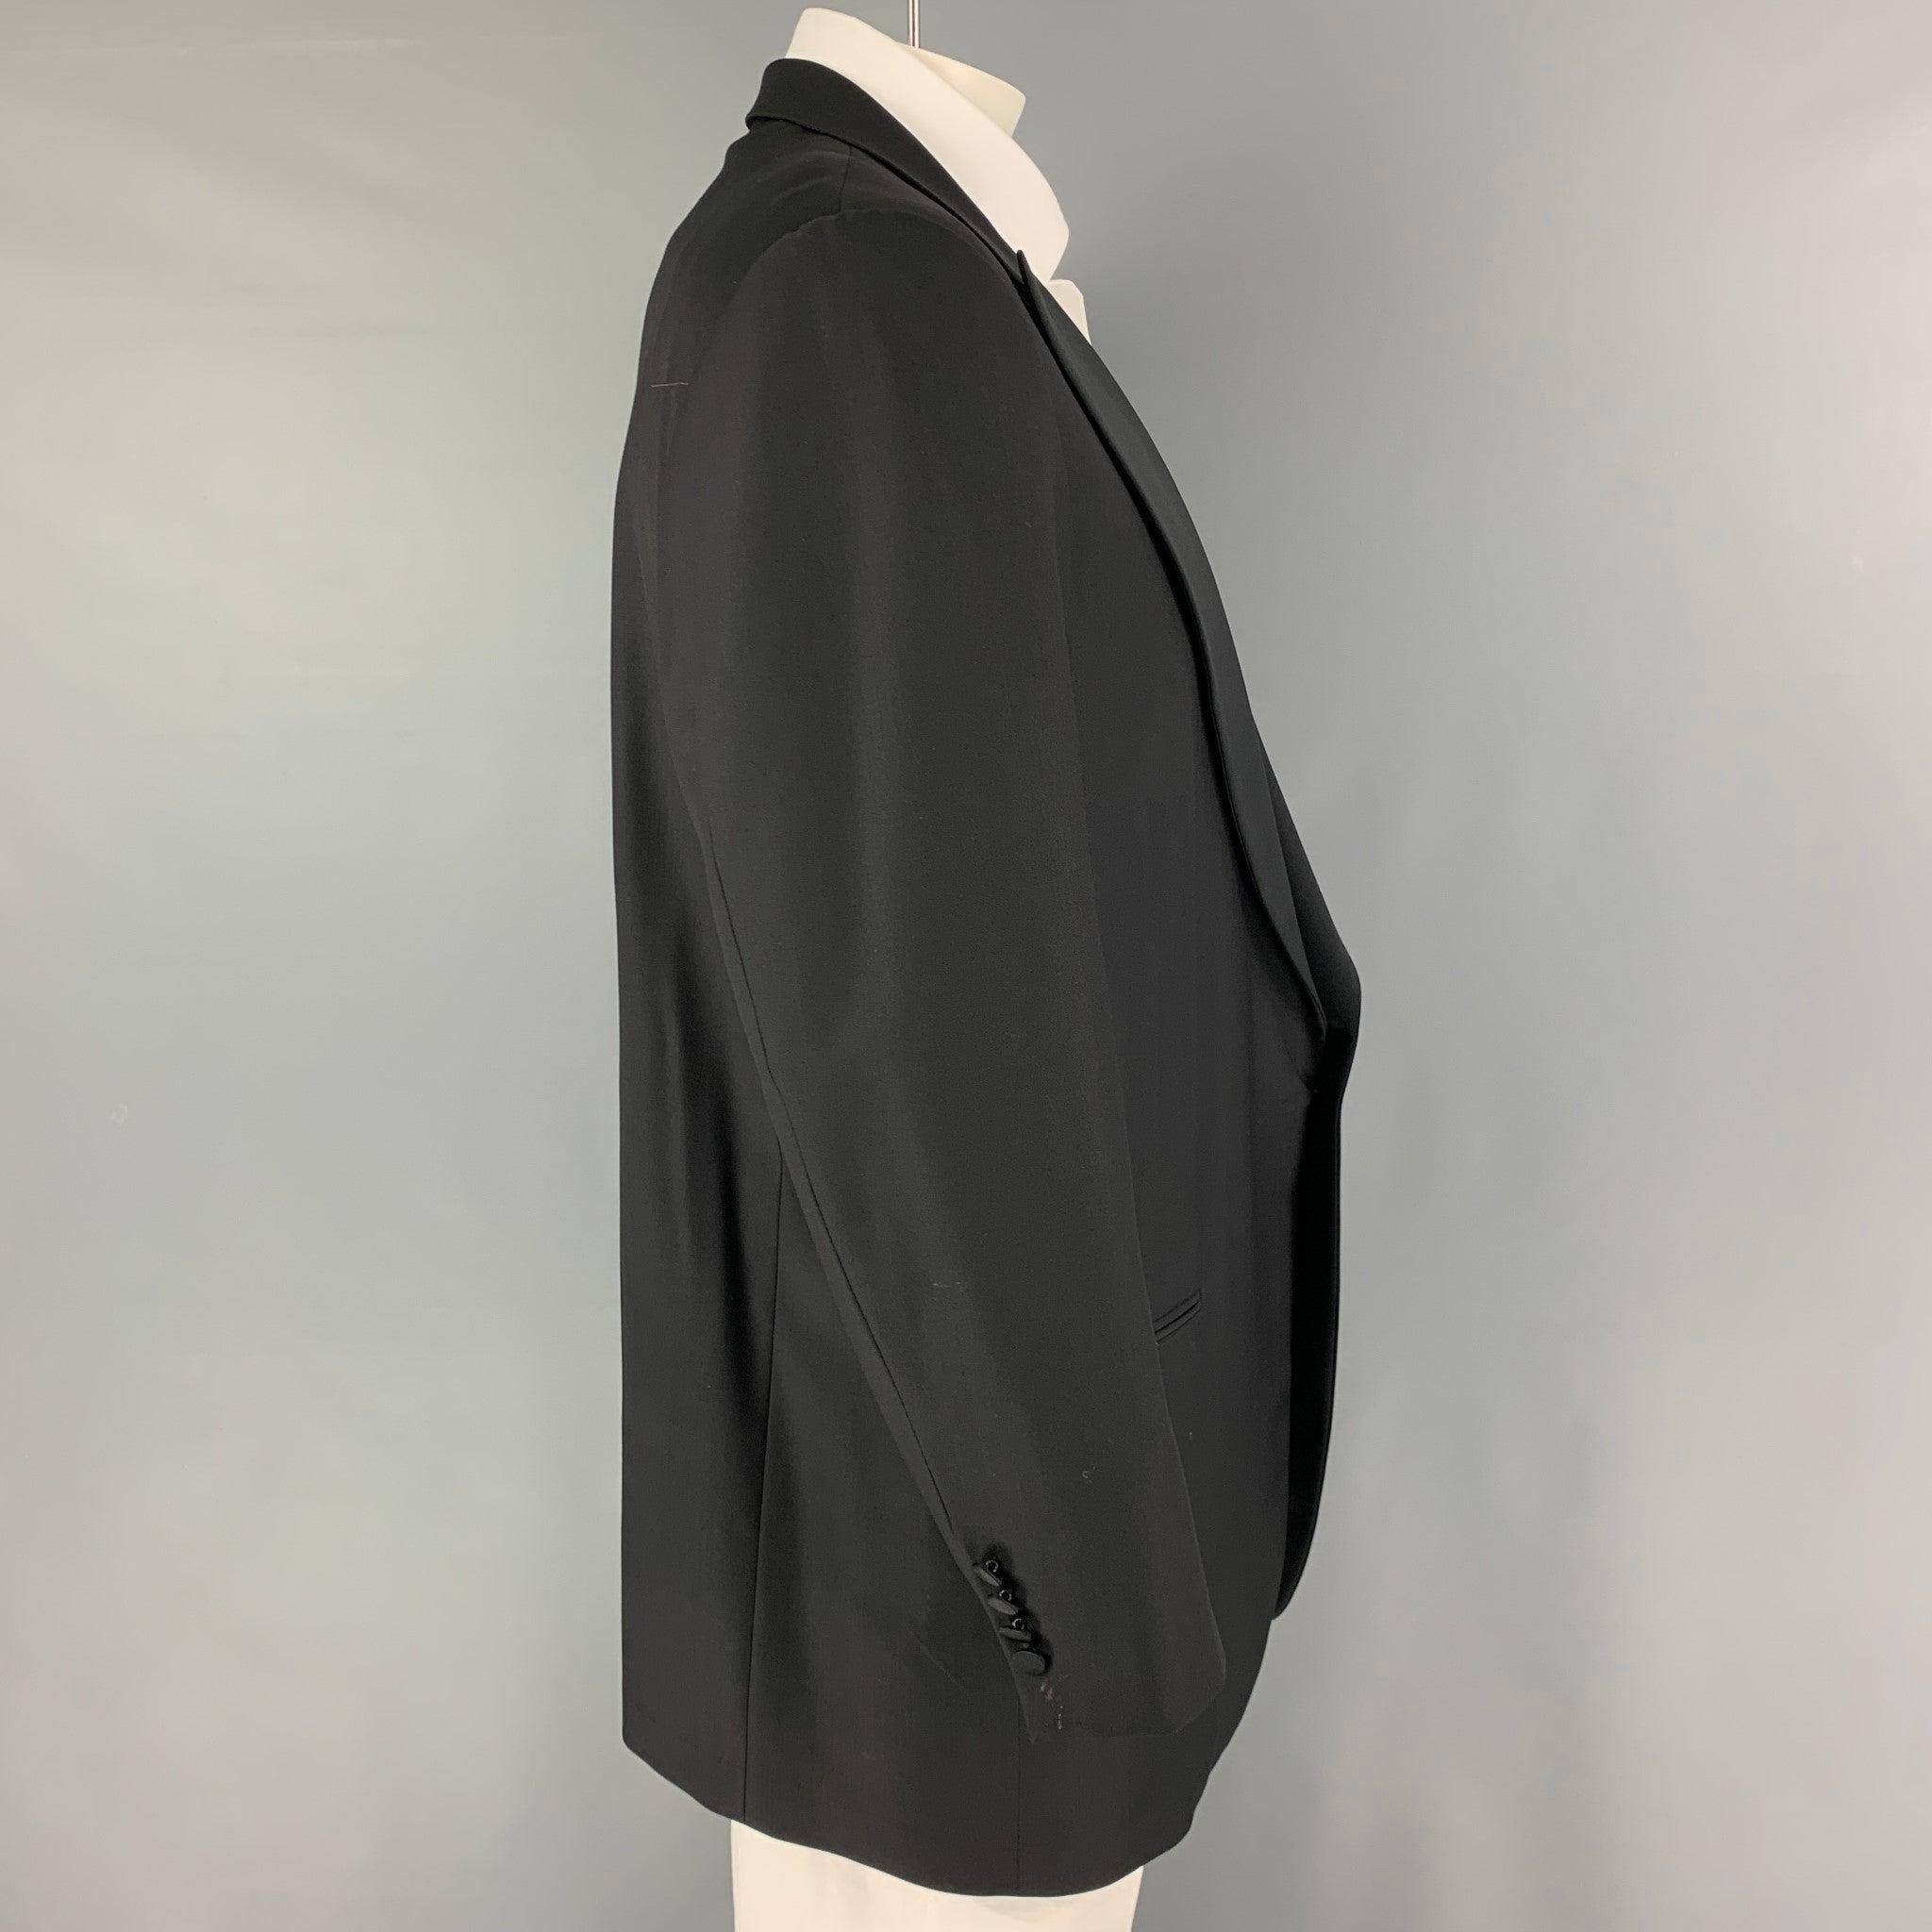 ERMENEGILDO ZEGNA sport coat comes in a black wool with a full liner featuring a peak lapel, slit pockets, and a single button closure.
Excellent
Pre-Owned Condition. 

Marked:   58 

Measurements: 
 
Shoulder: 19 inches Chest: 48 inches Sleeve: